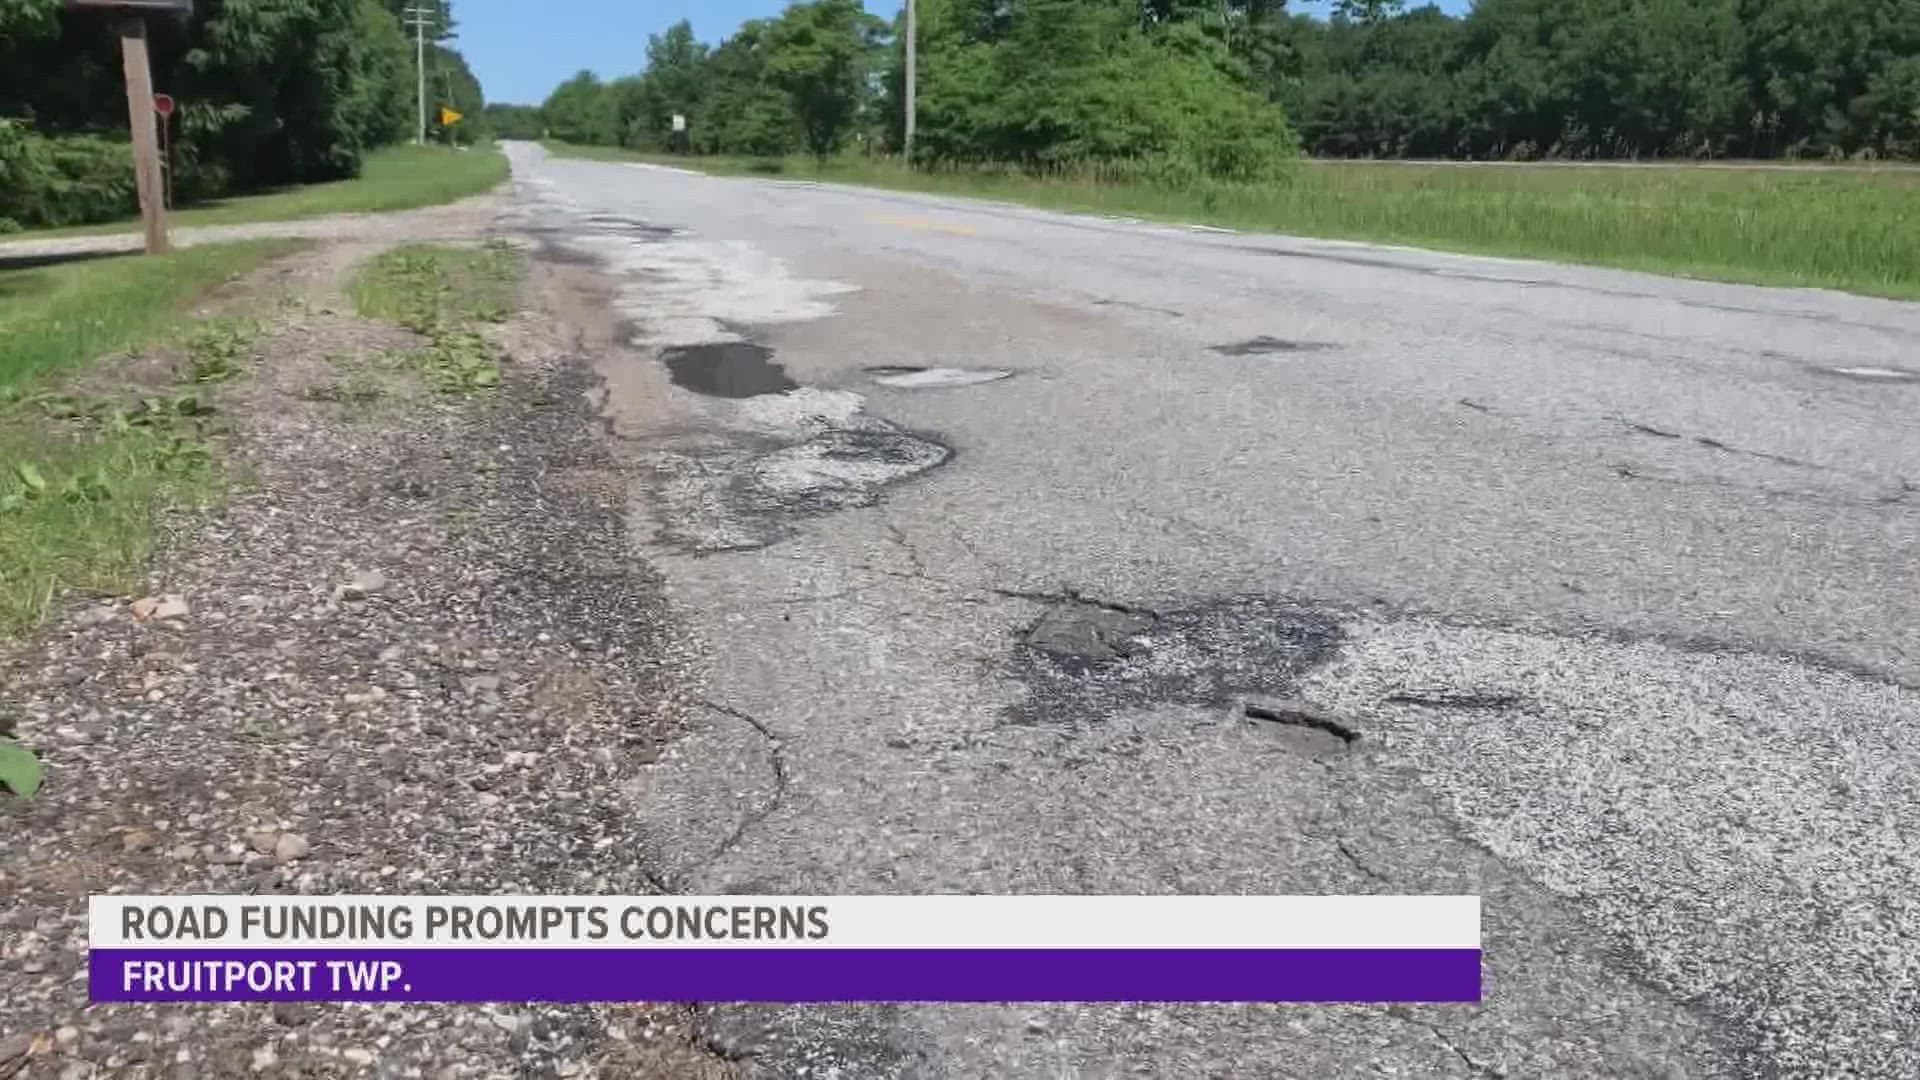 After complaining for years of the deuteriation of Kendra Road it is finally being fixed. However, how the funding is planned to come leaves community confused.